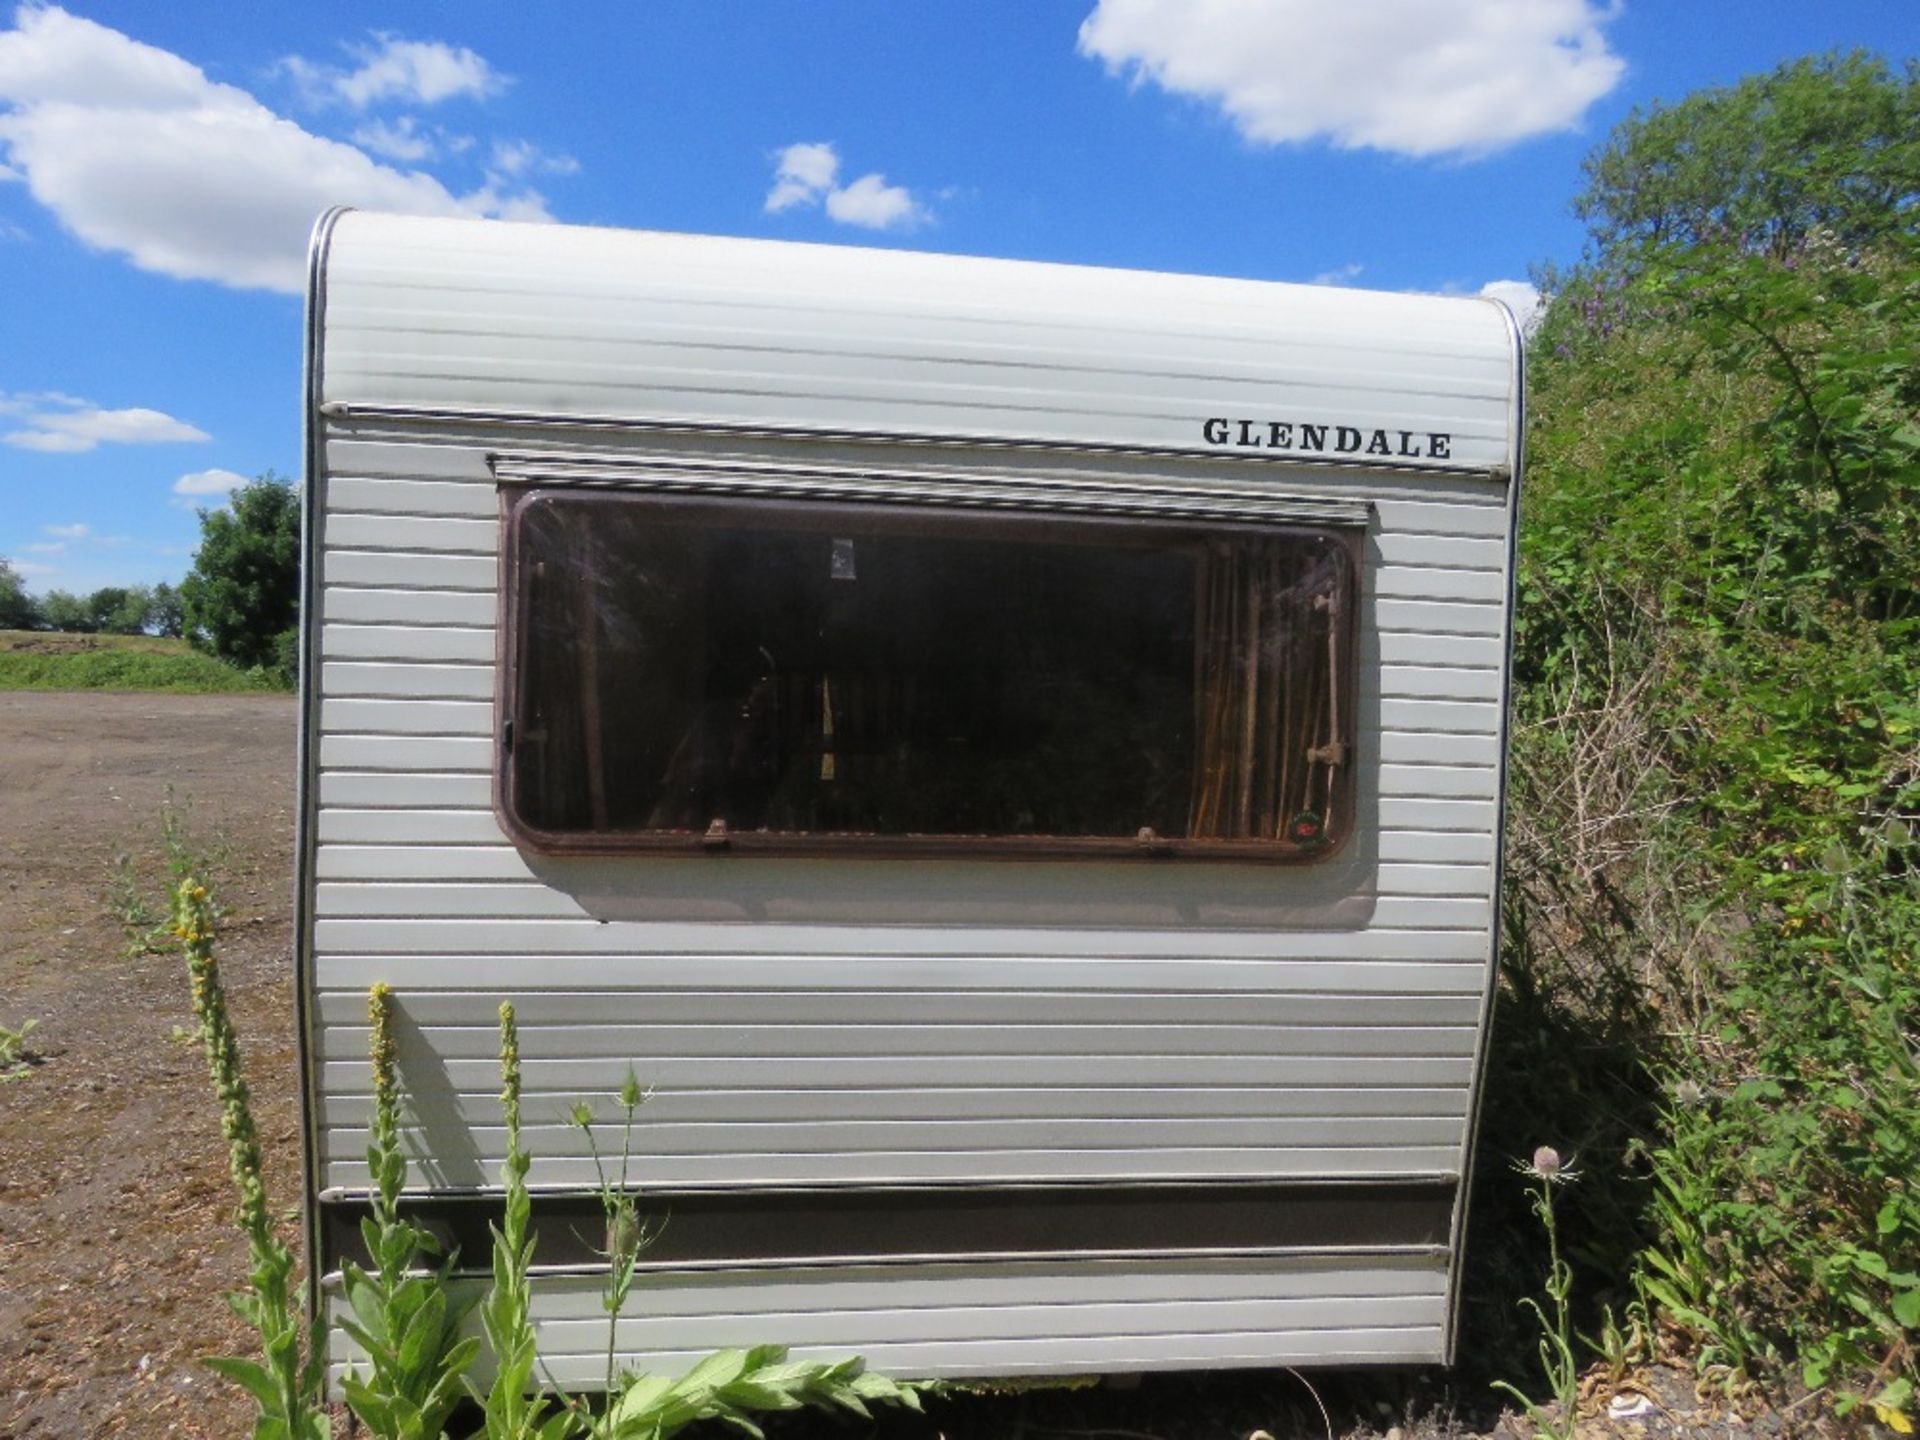 GLENDALE DEMOUNTABLE CAMPER, 14FT X 7FT BASE APPROX PLUS A LUTON POD. NO VAT ON THE HAMMER PRICE O - Image 3 of 11